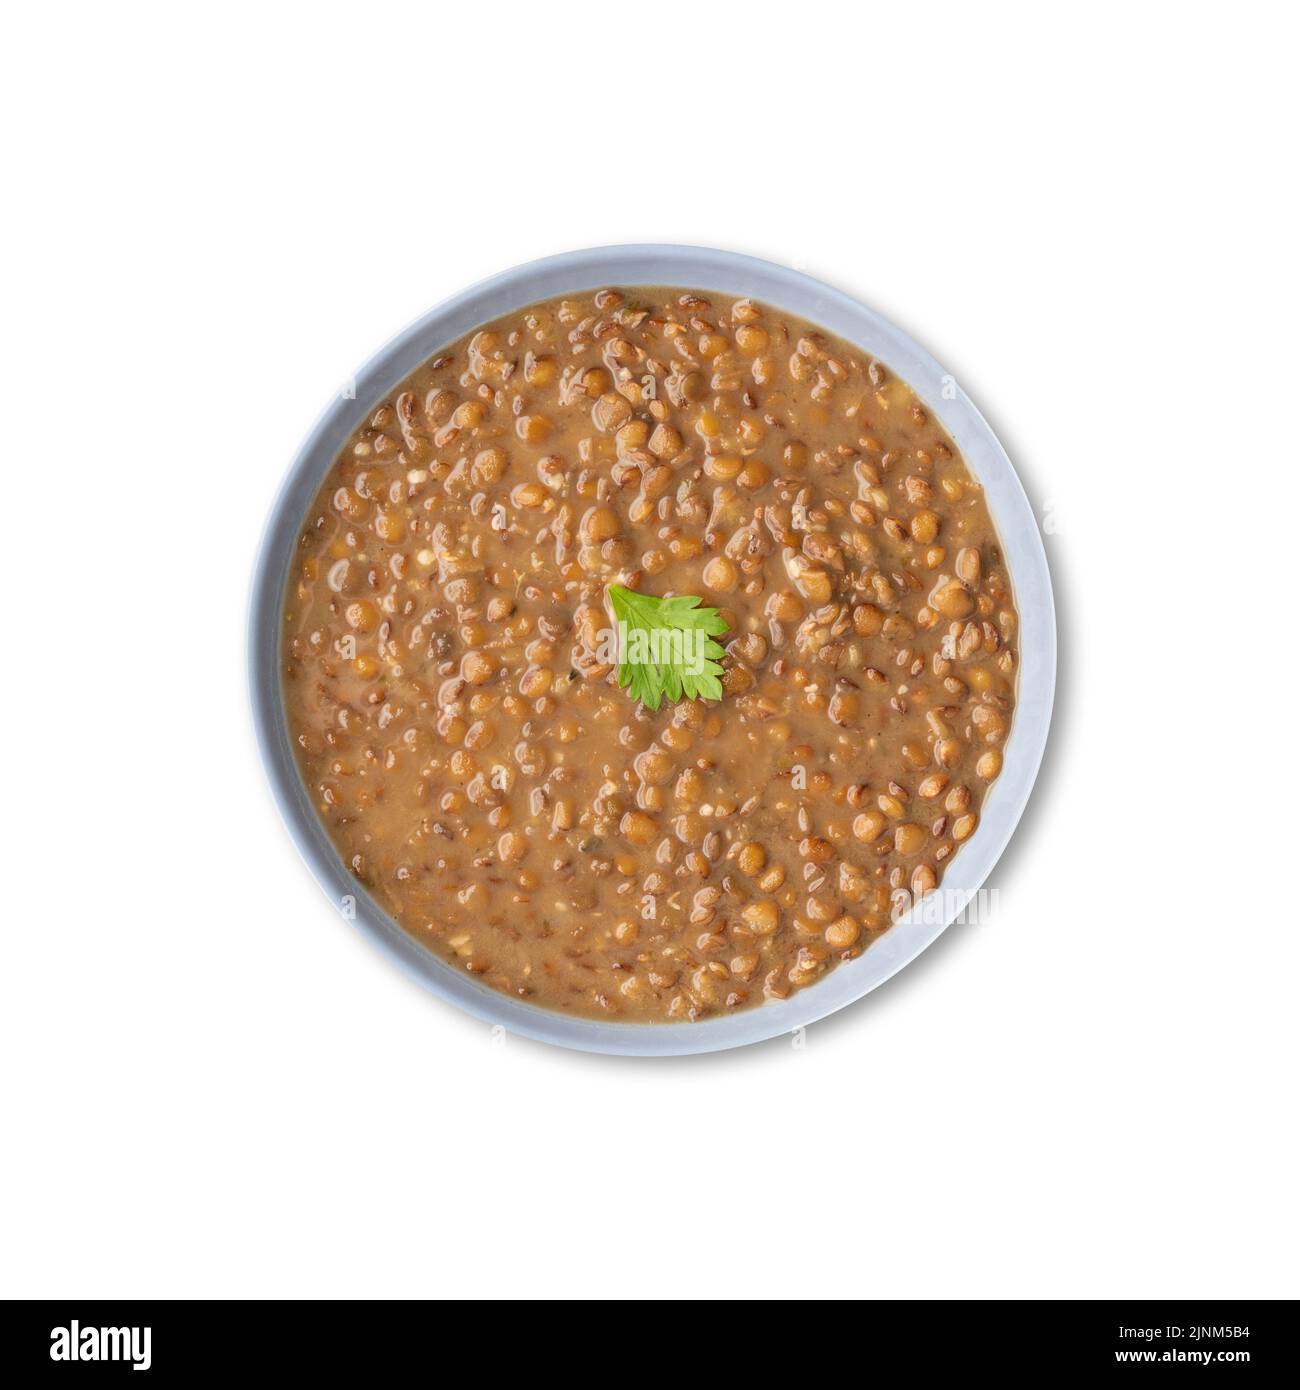 Lentil soup in a bowl isolated over white background. Stock Photo